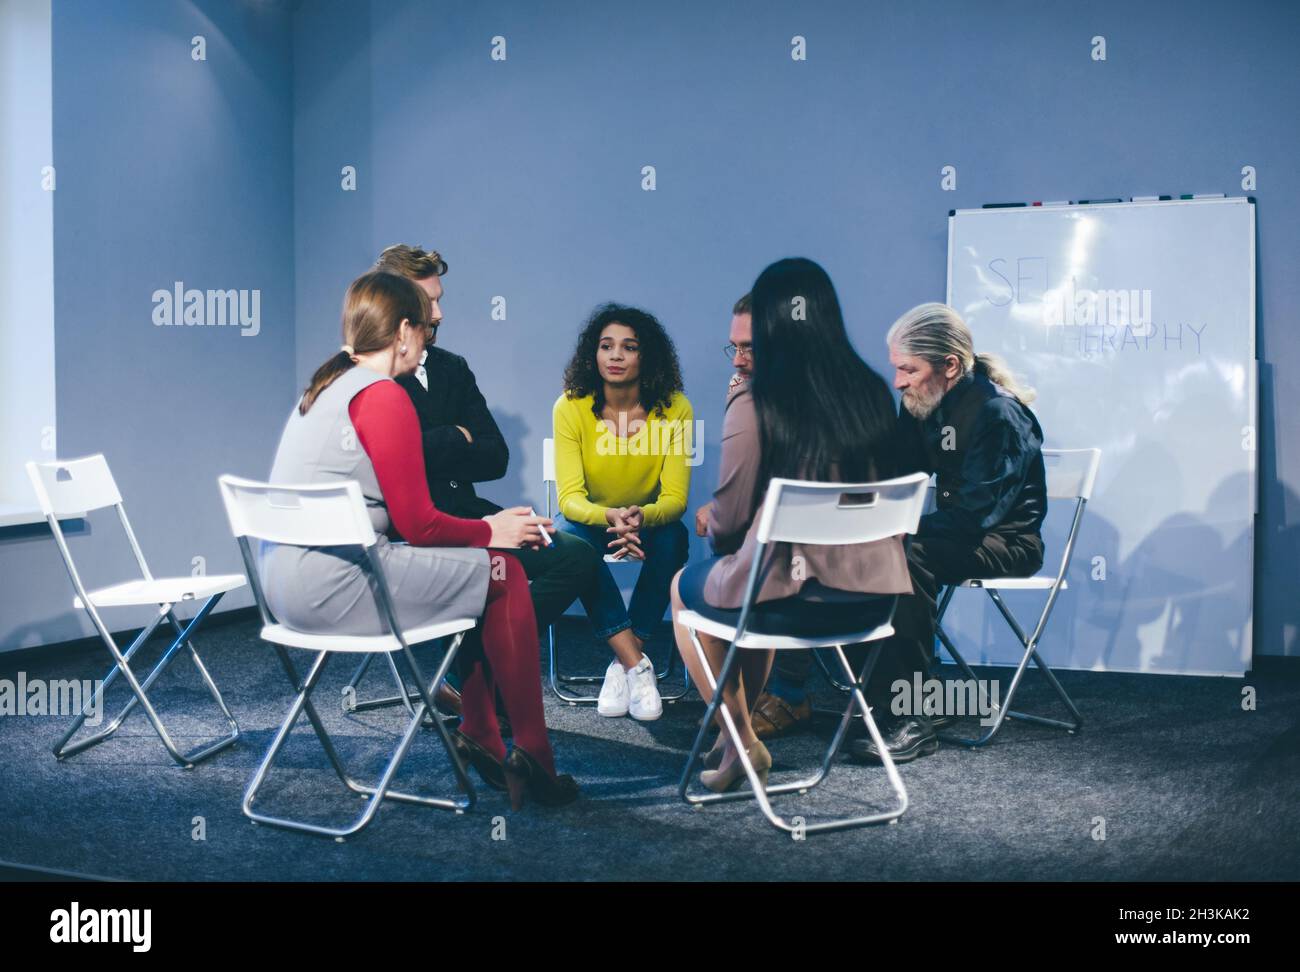 Large group of people having a counseling session. Stock Photo